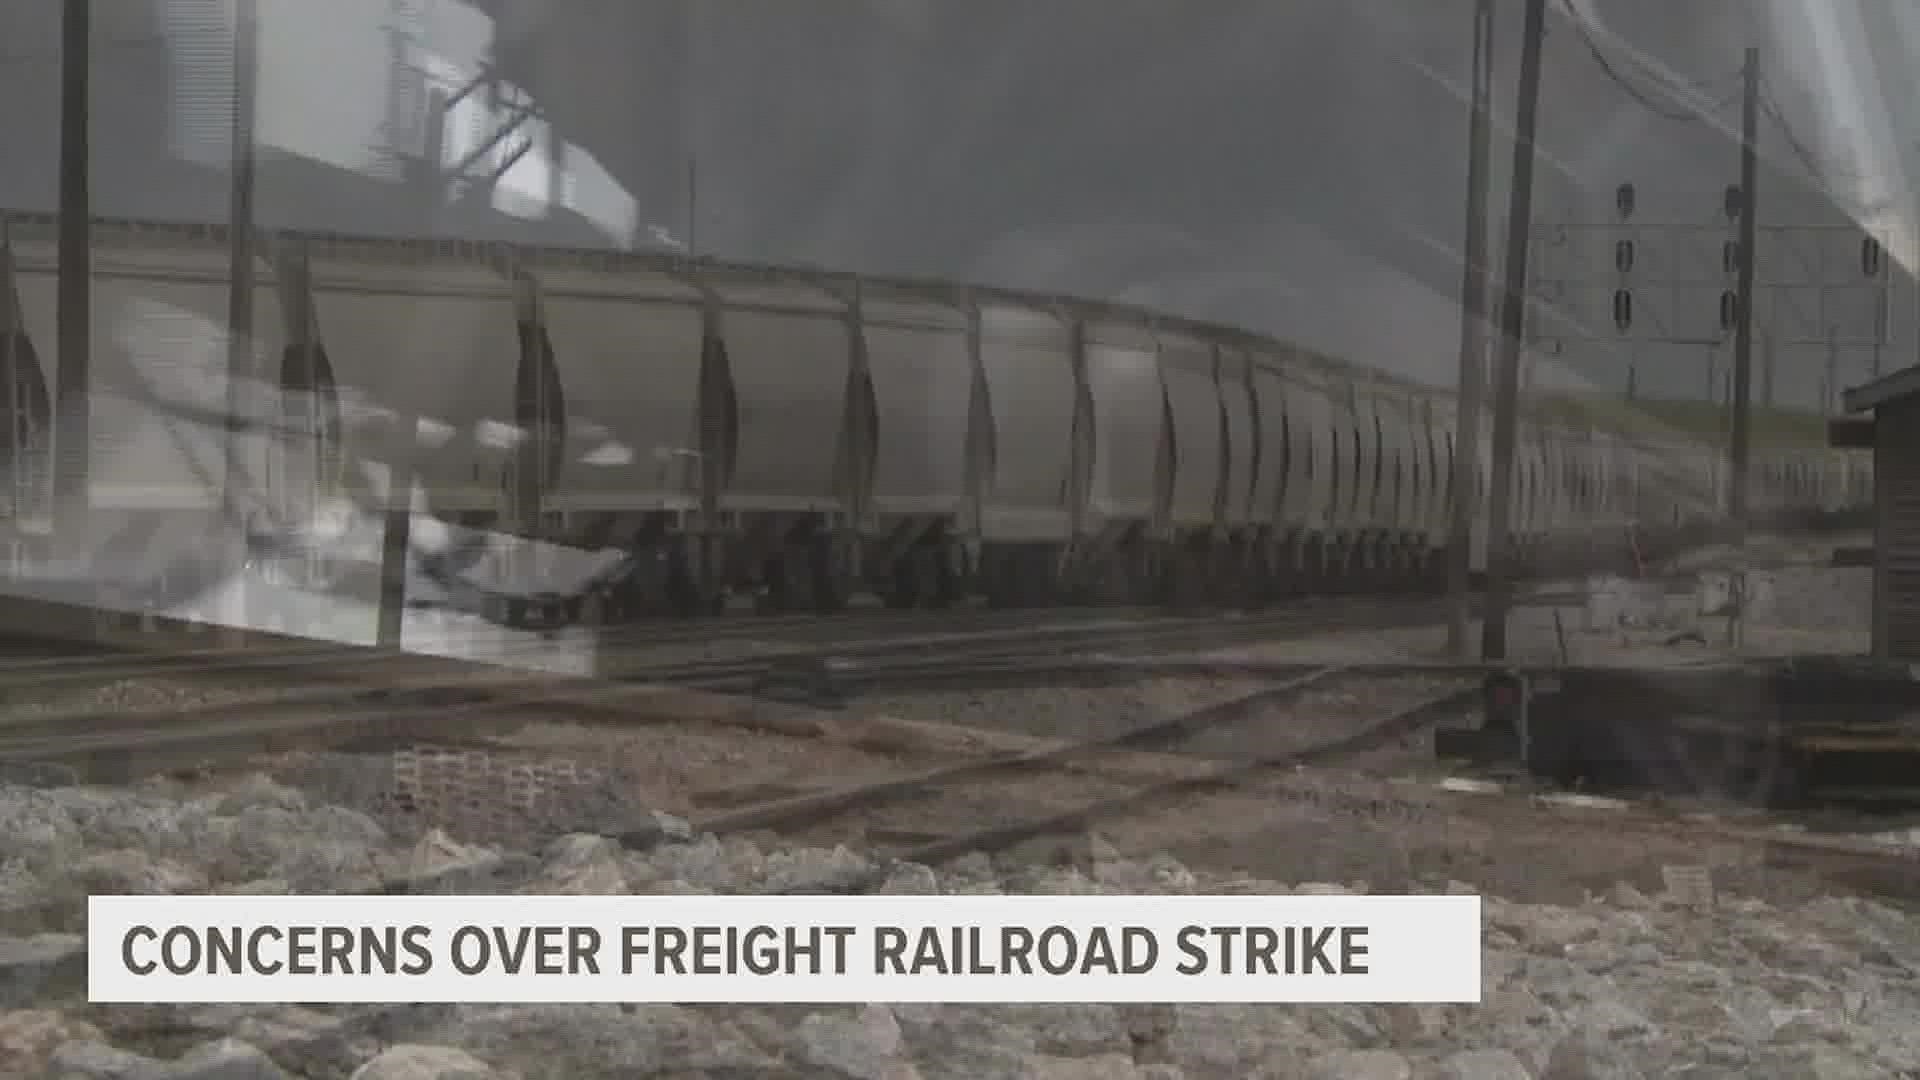 Union leaders said the railroads didn't do enough to address worker concerns about working conditions and the lack of paid time off.